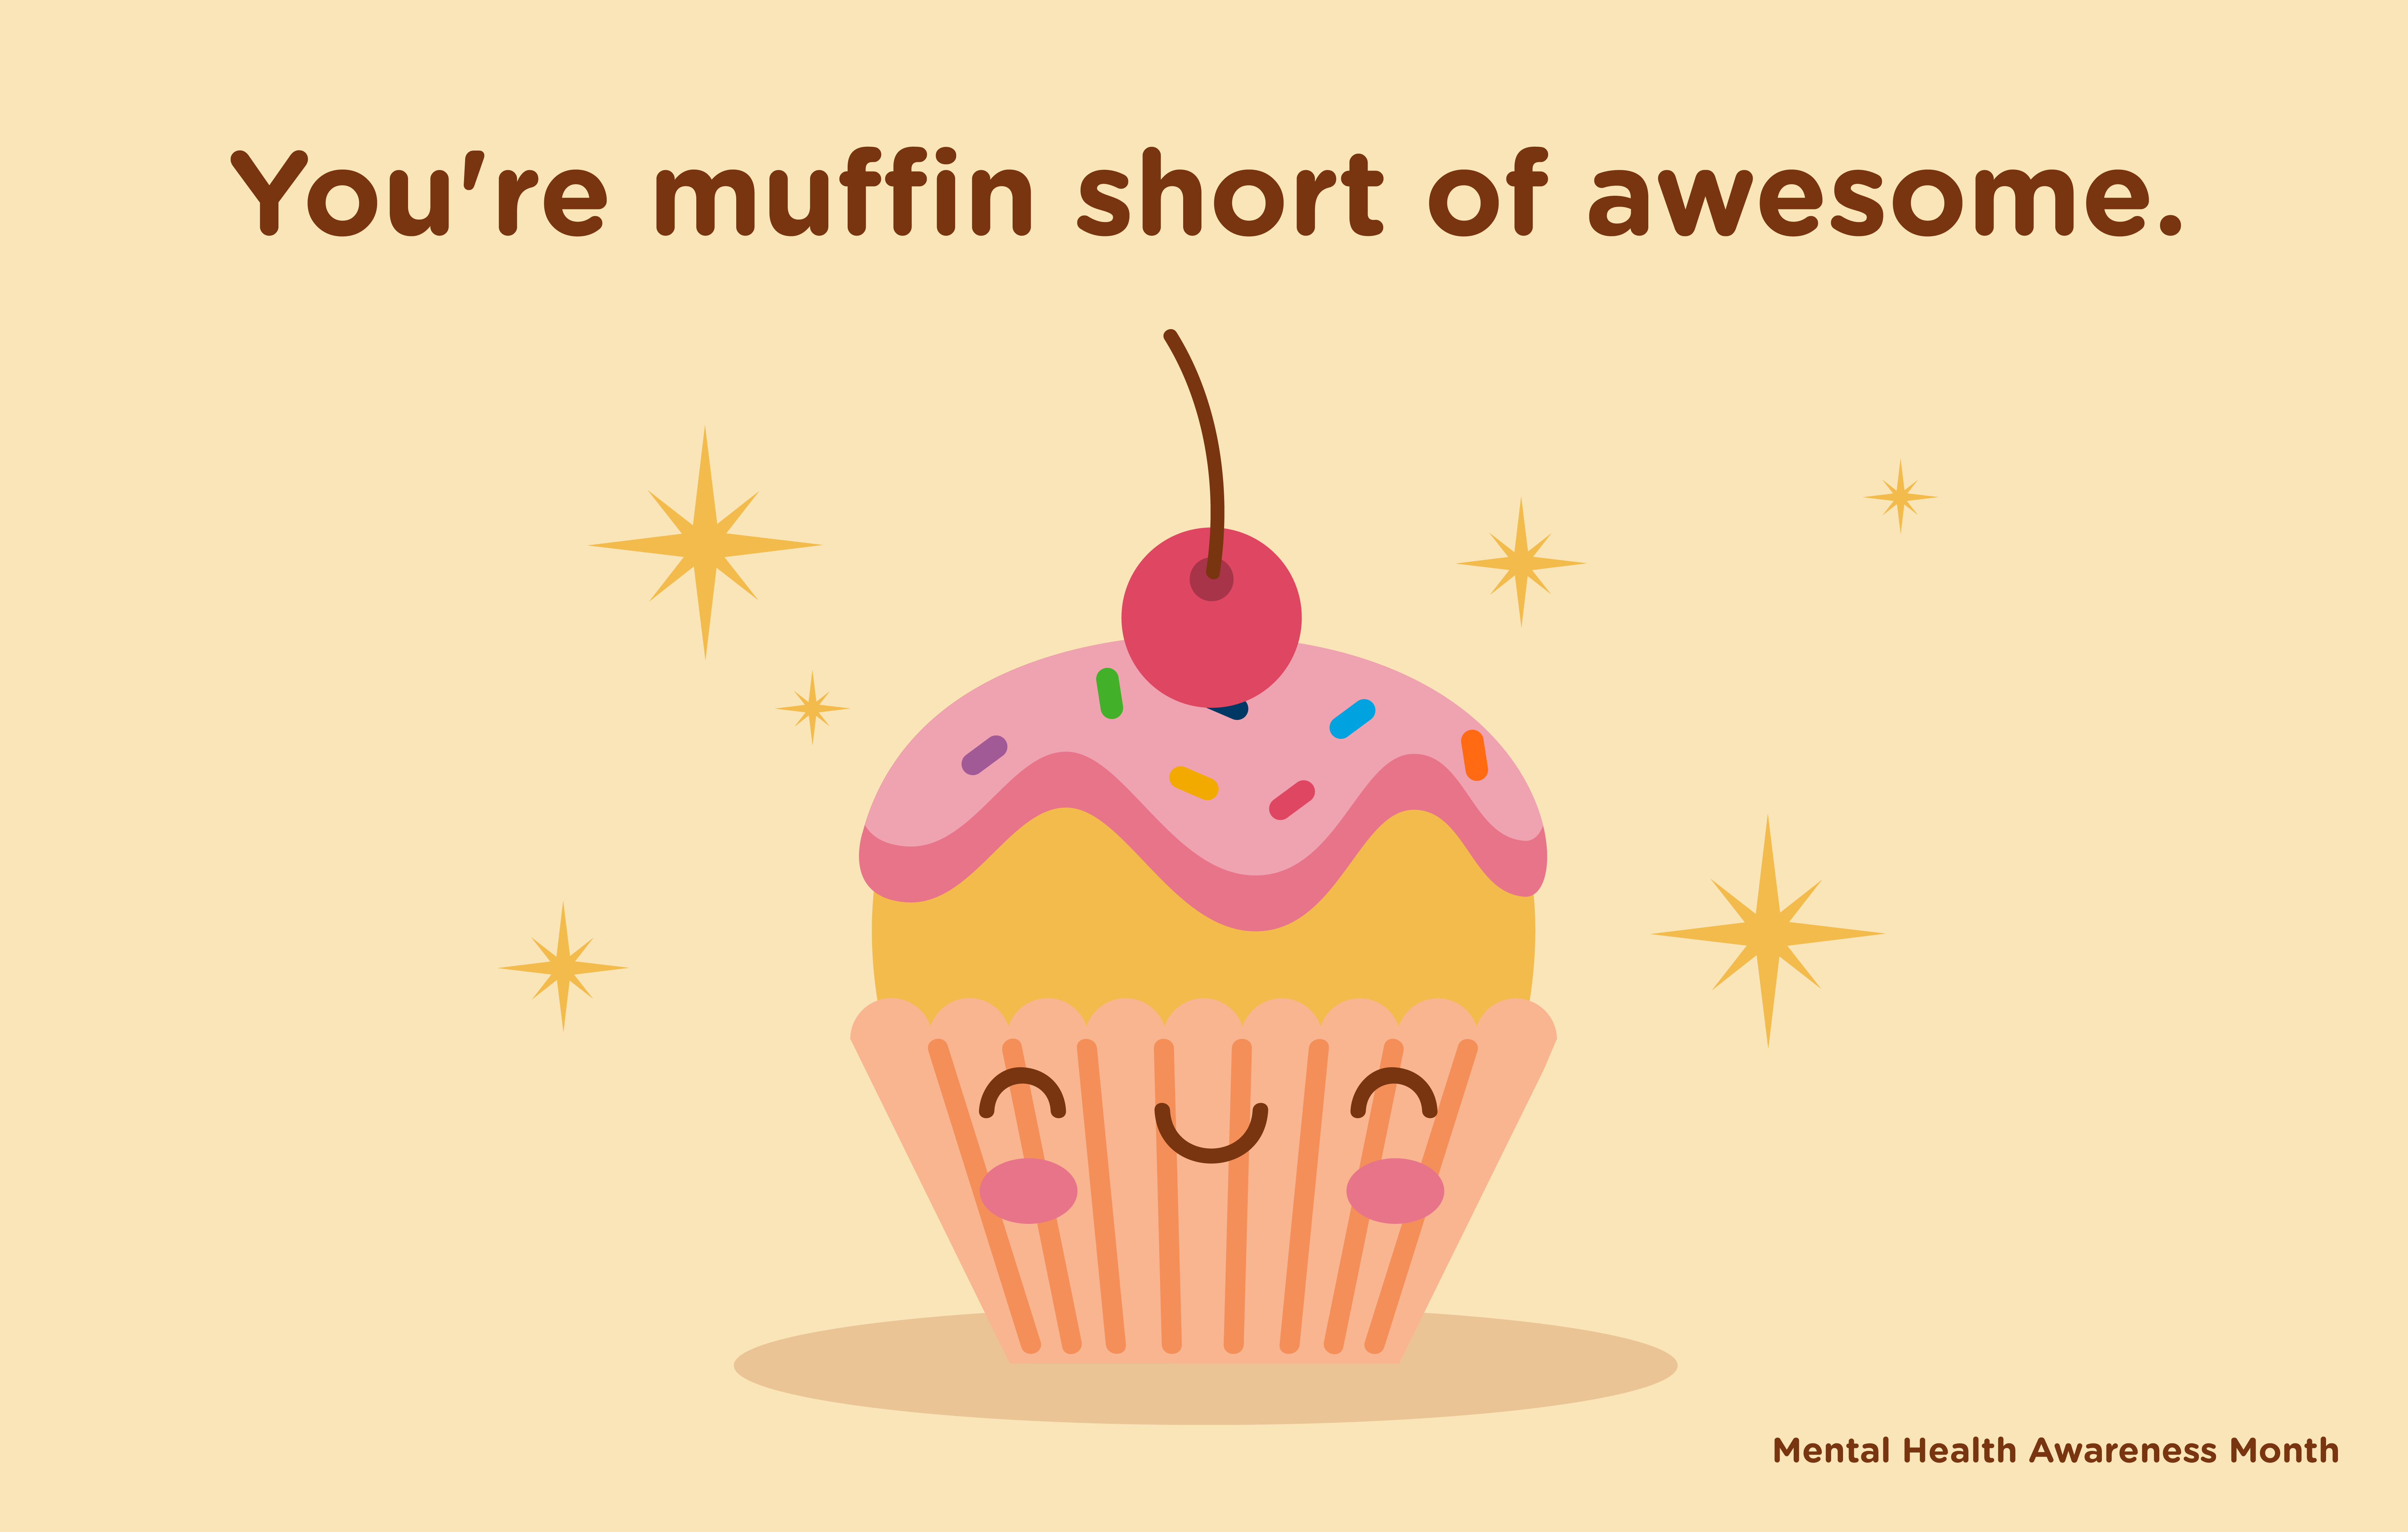 Mental Health Awareness Month: You're muffin short of awesome.